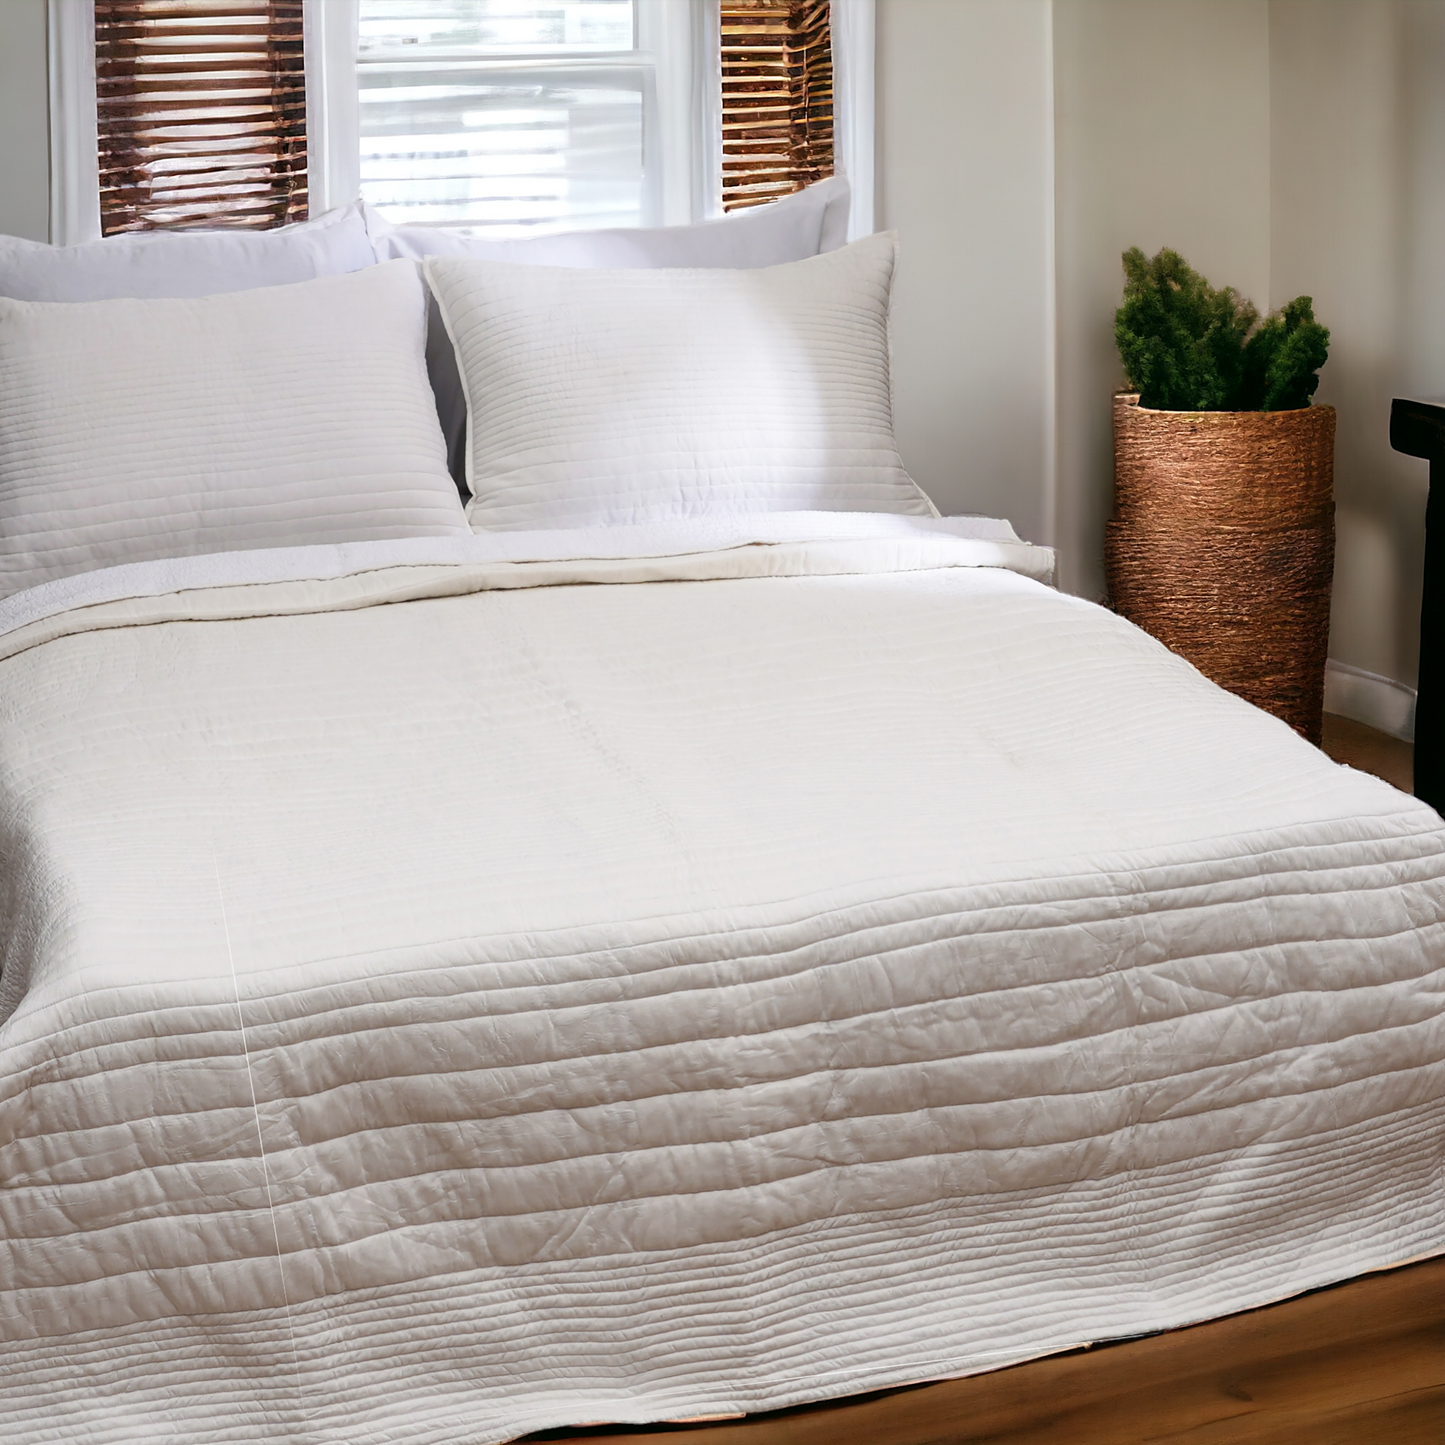 SHWET - White luxury 300TC cotton satin Quilted pillow cases, Sizes available